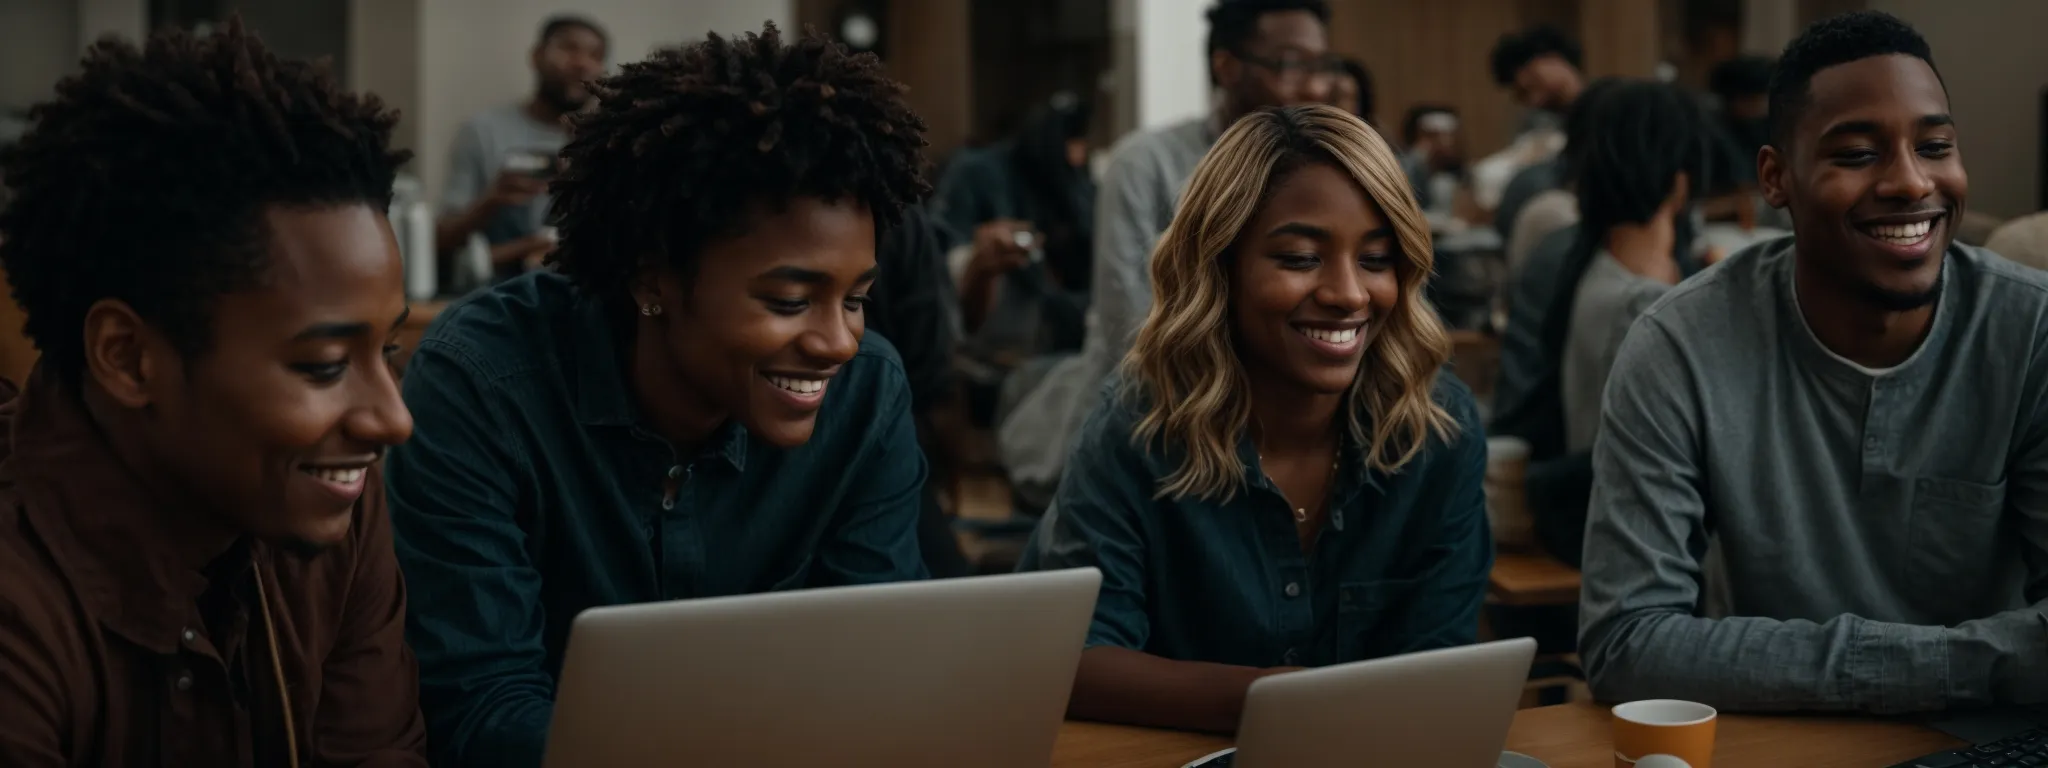 a diverse group of people smiling at their laptop screens, visibly engaged with the interactive content they are experiencing.